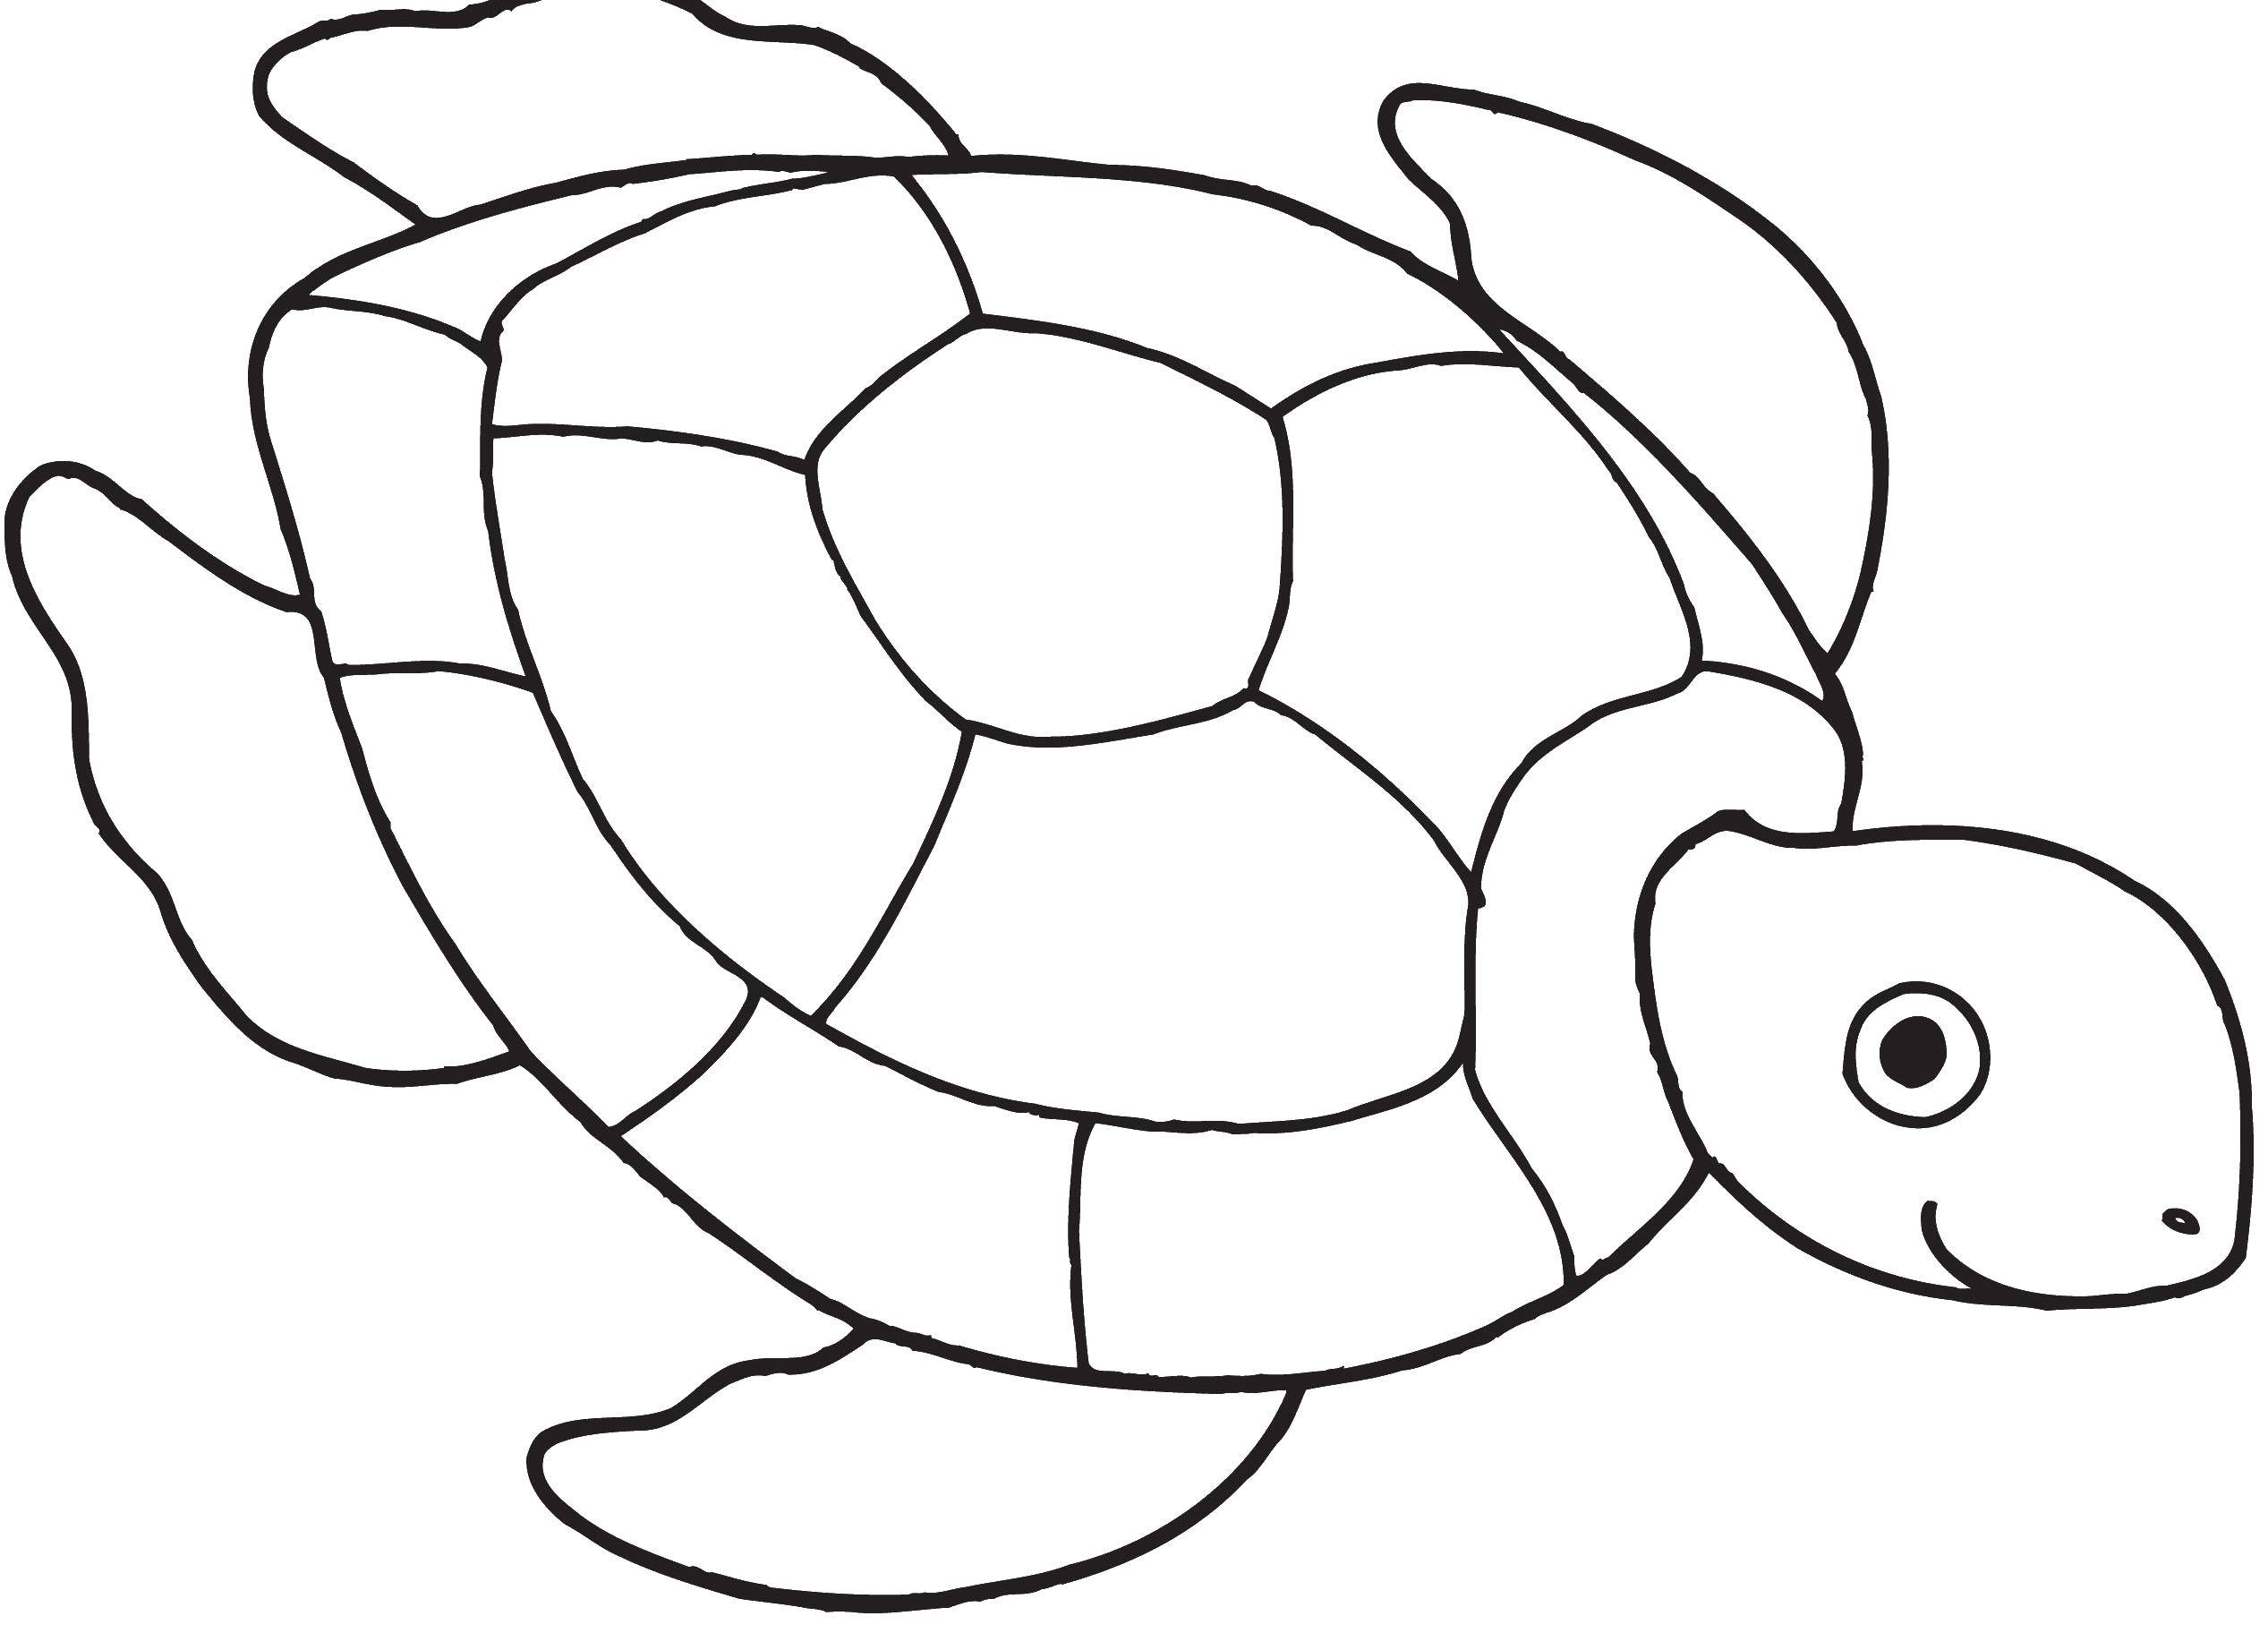 Coloring Bug. Category Animals. Tags:  animals, turtle.